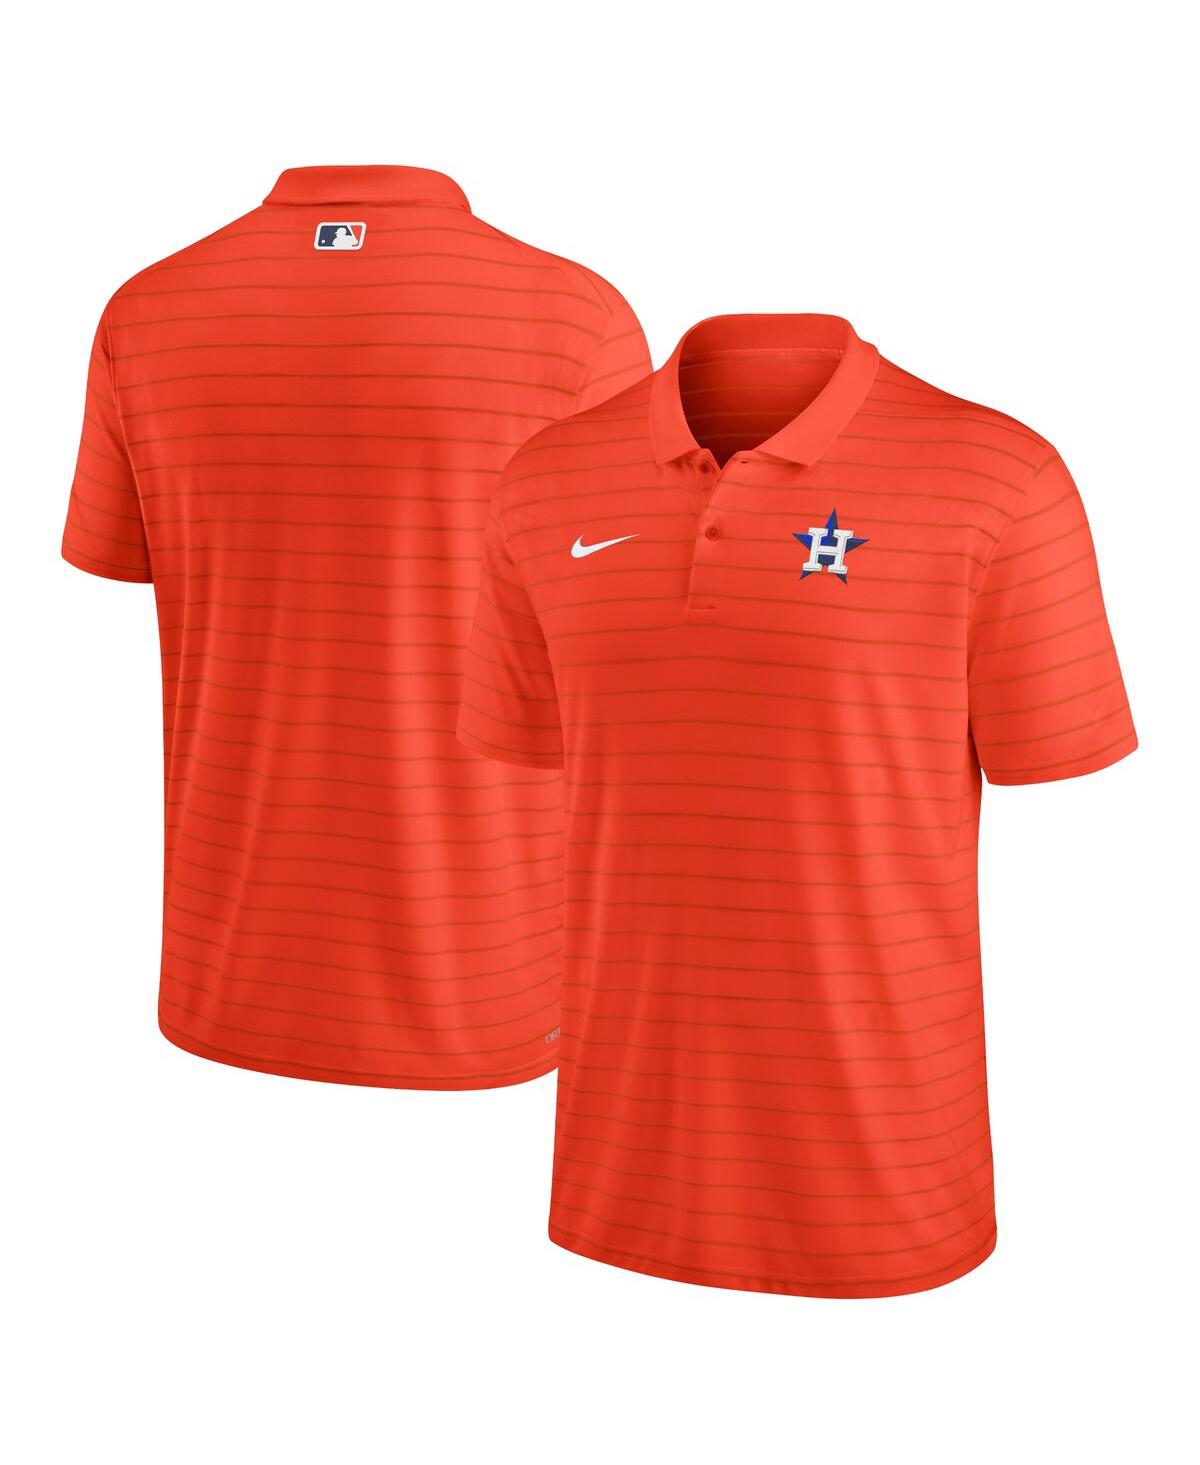 Nike Men's  Orange Houston Astros Authentic Collection Victory Striped Performance Polo Shirt